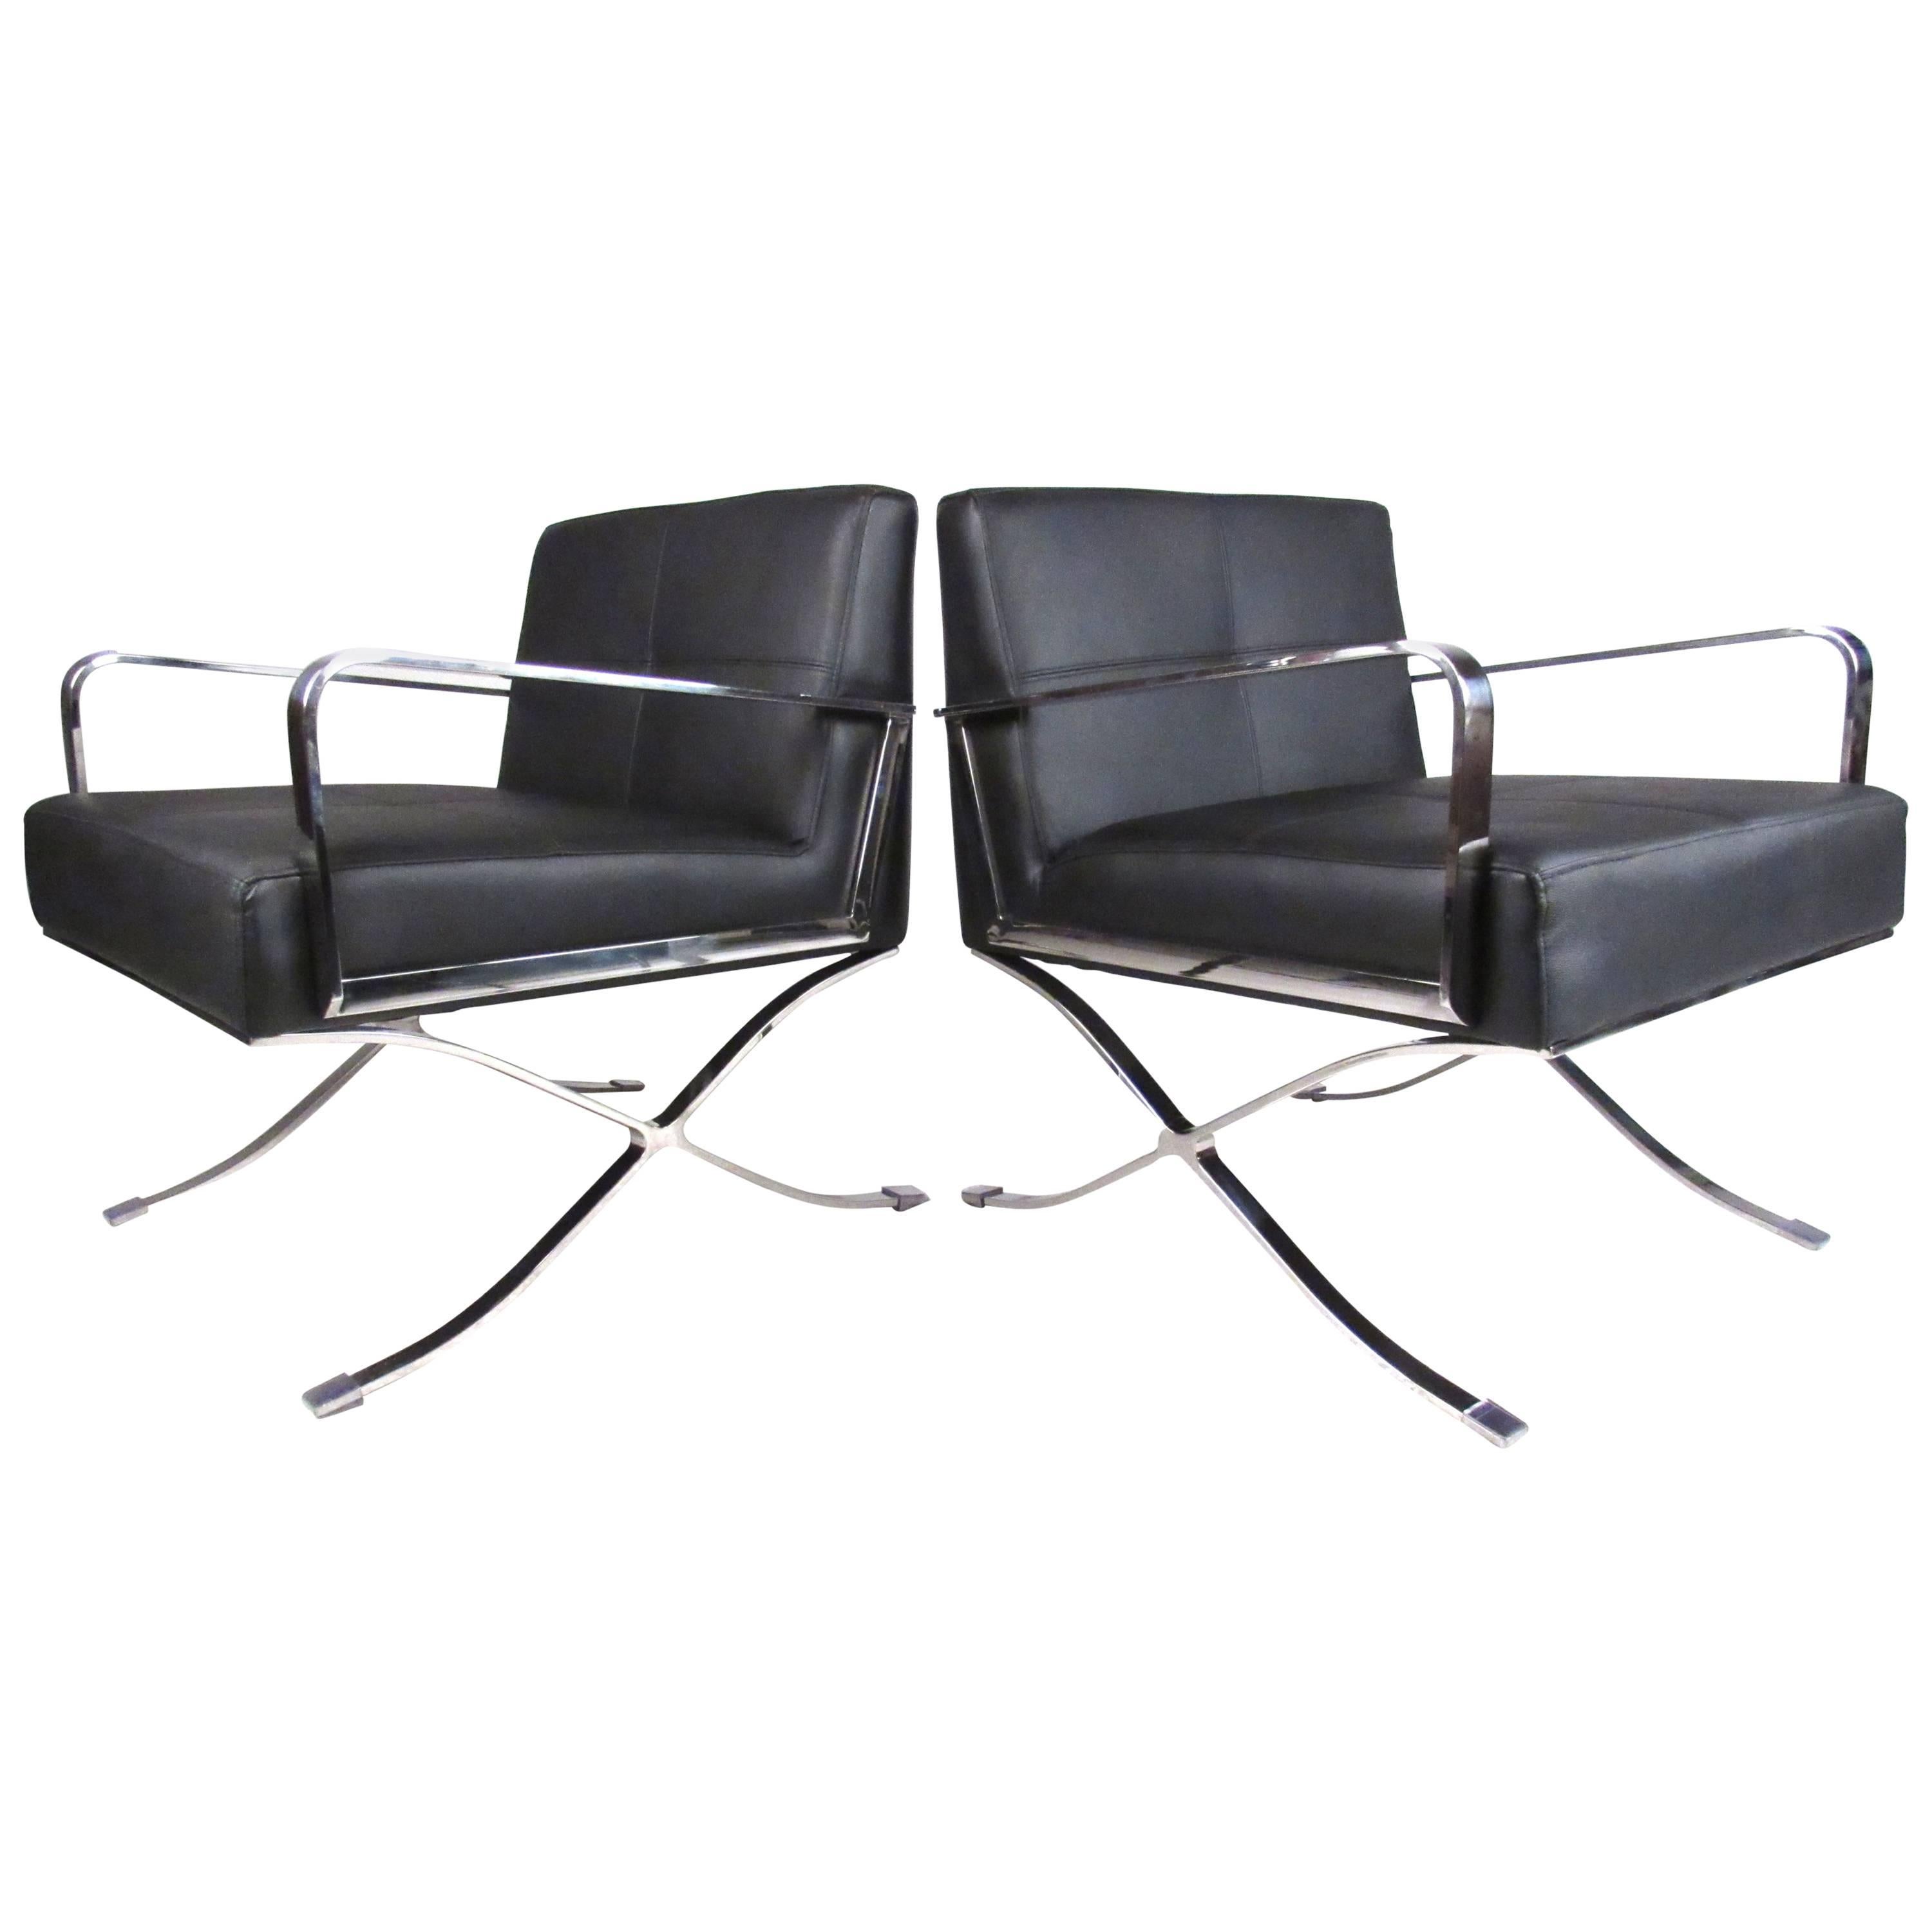 Pair of Modern Chrome and Vinyl Lounge Chairs